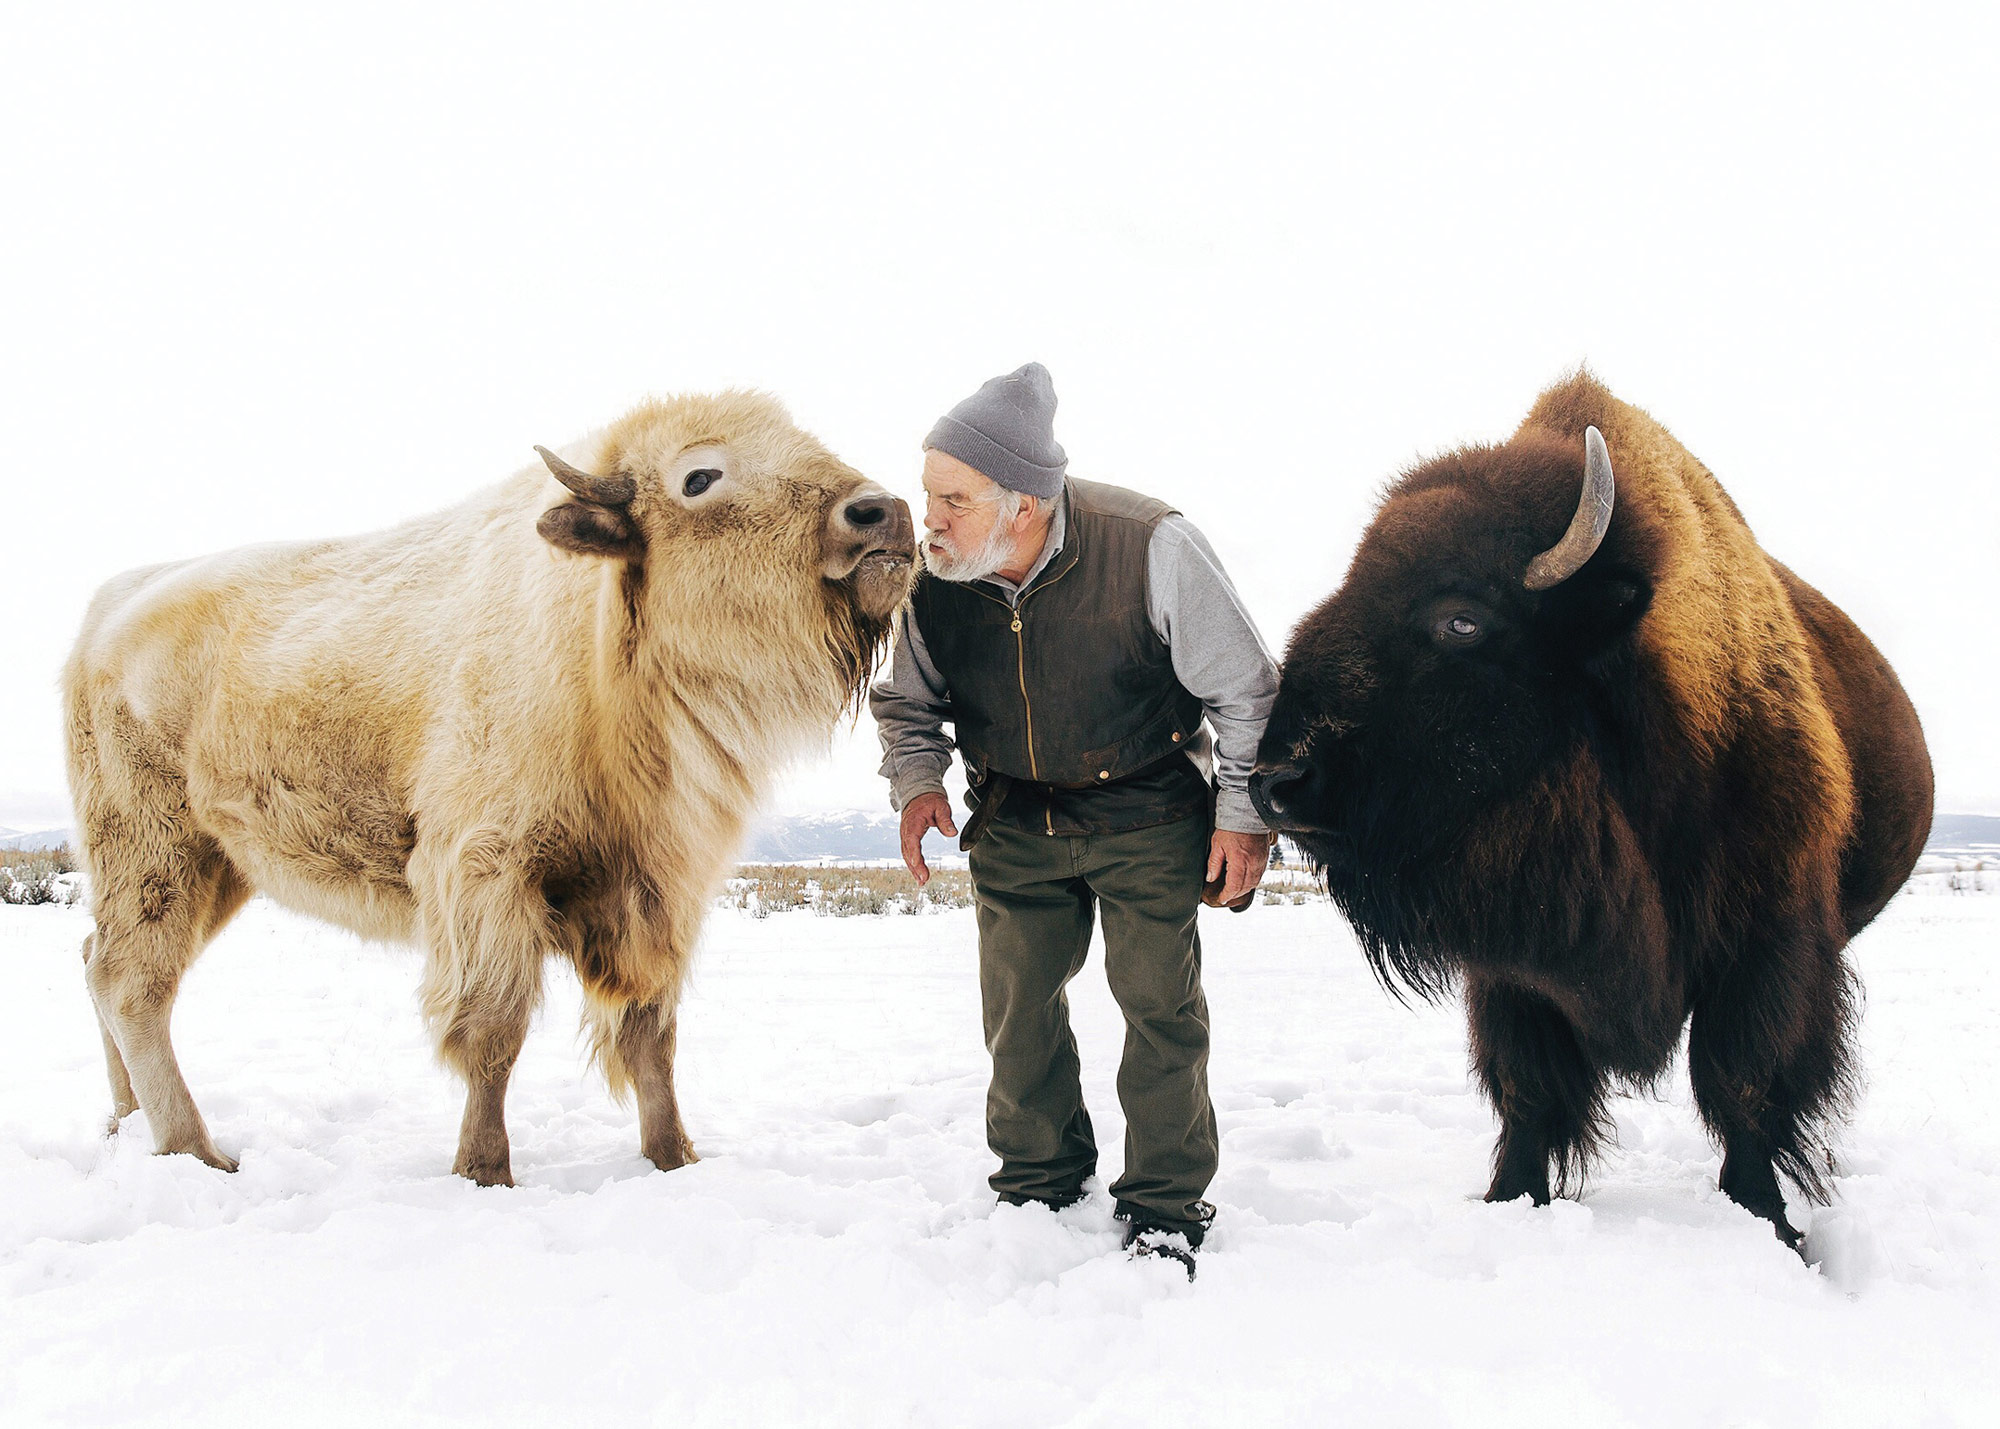 Jean stands with bison, Nima and Bluebell, at Earthfire Institute in Idaho